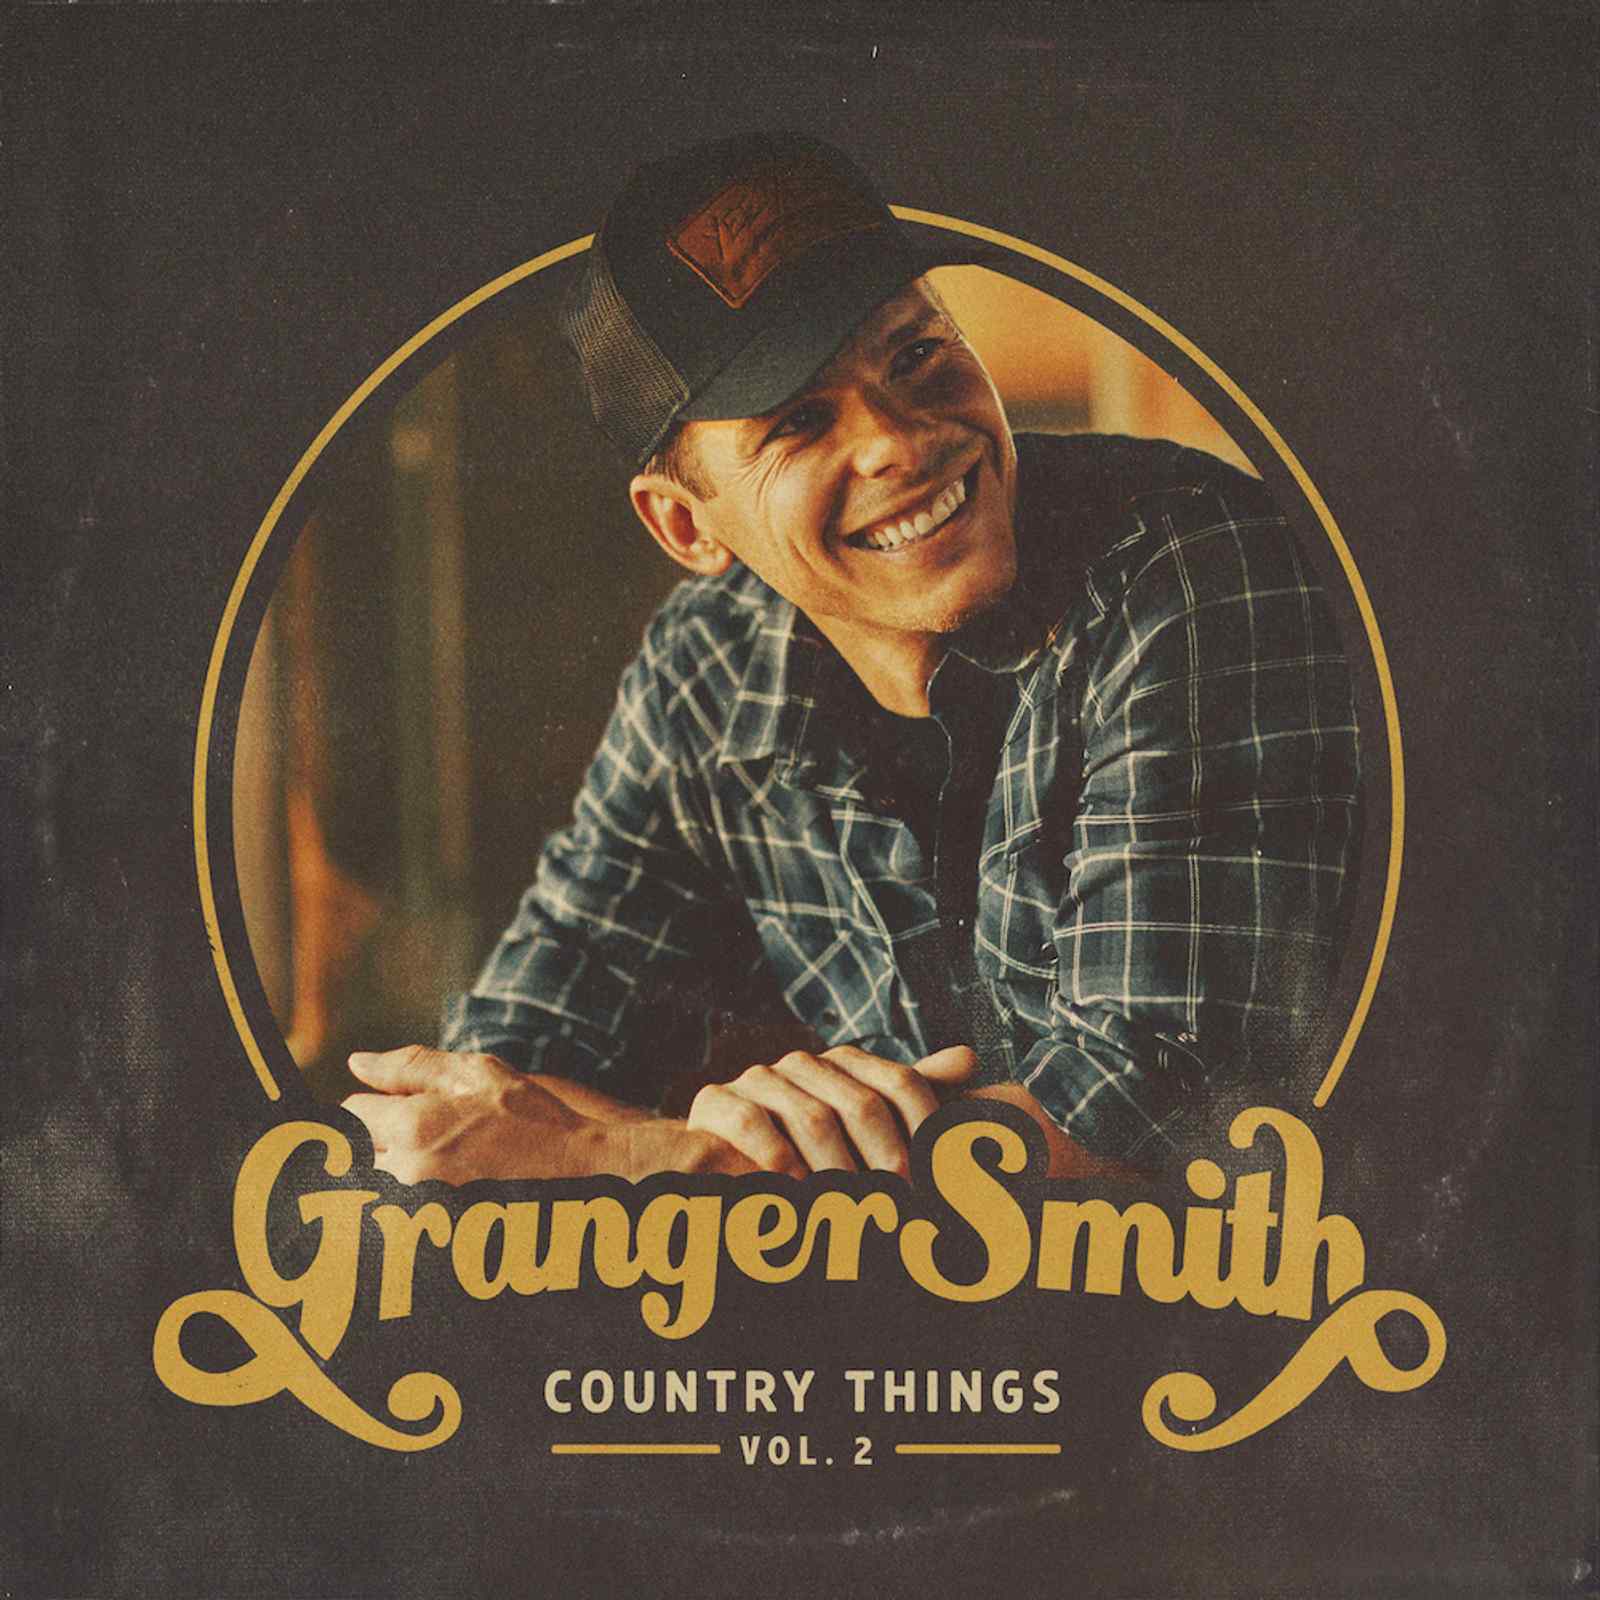 Country Things, Vol. 2 by Granger Smith